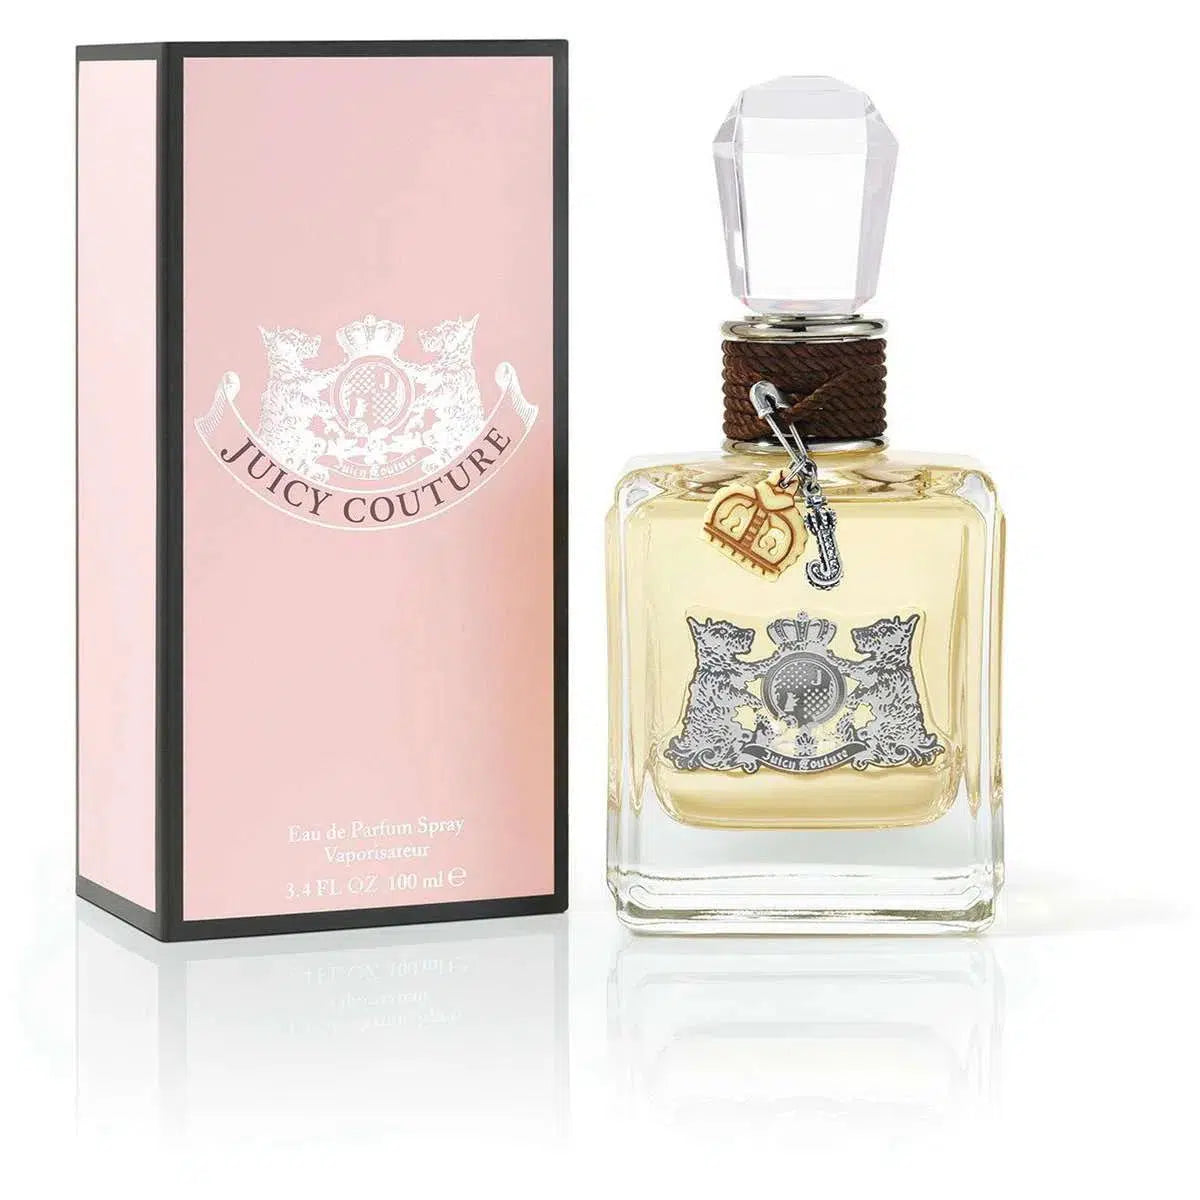 Buy Juicy Couture 100ml for P3995.00 Only!